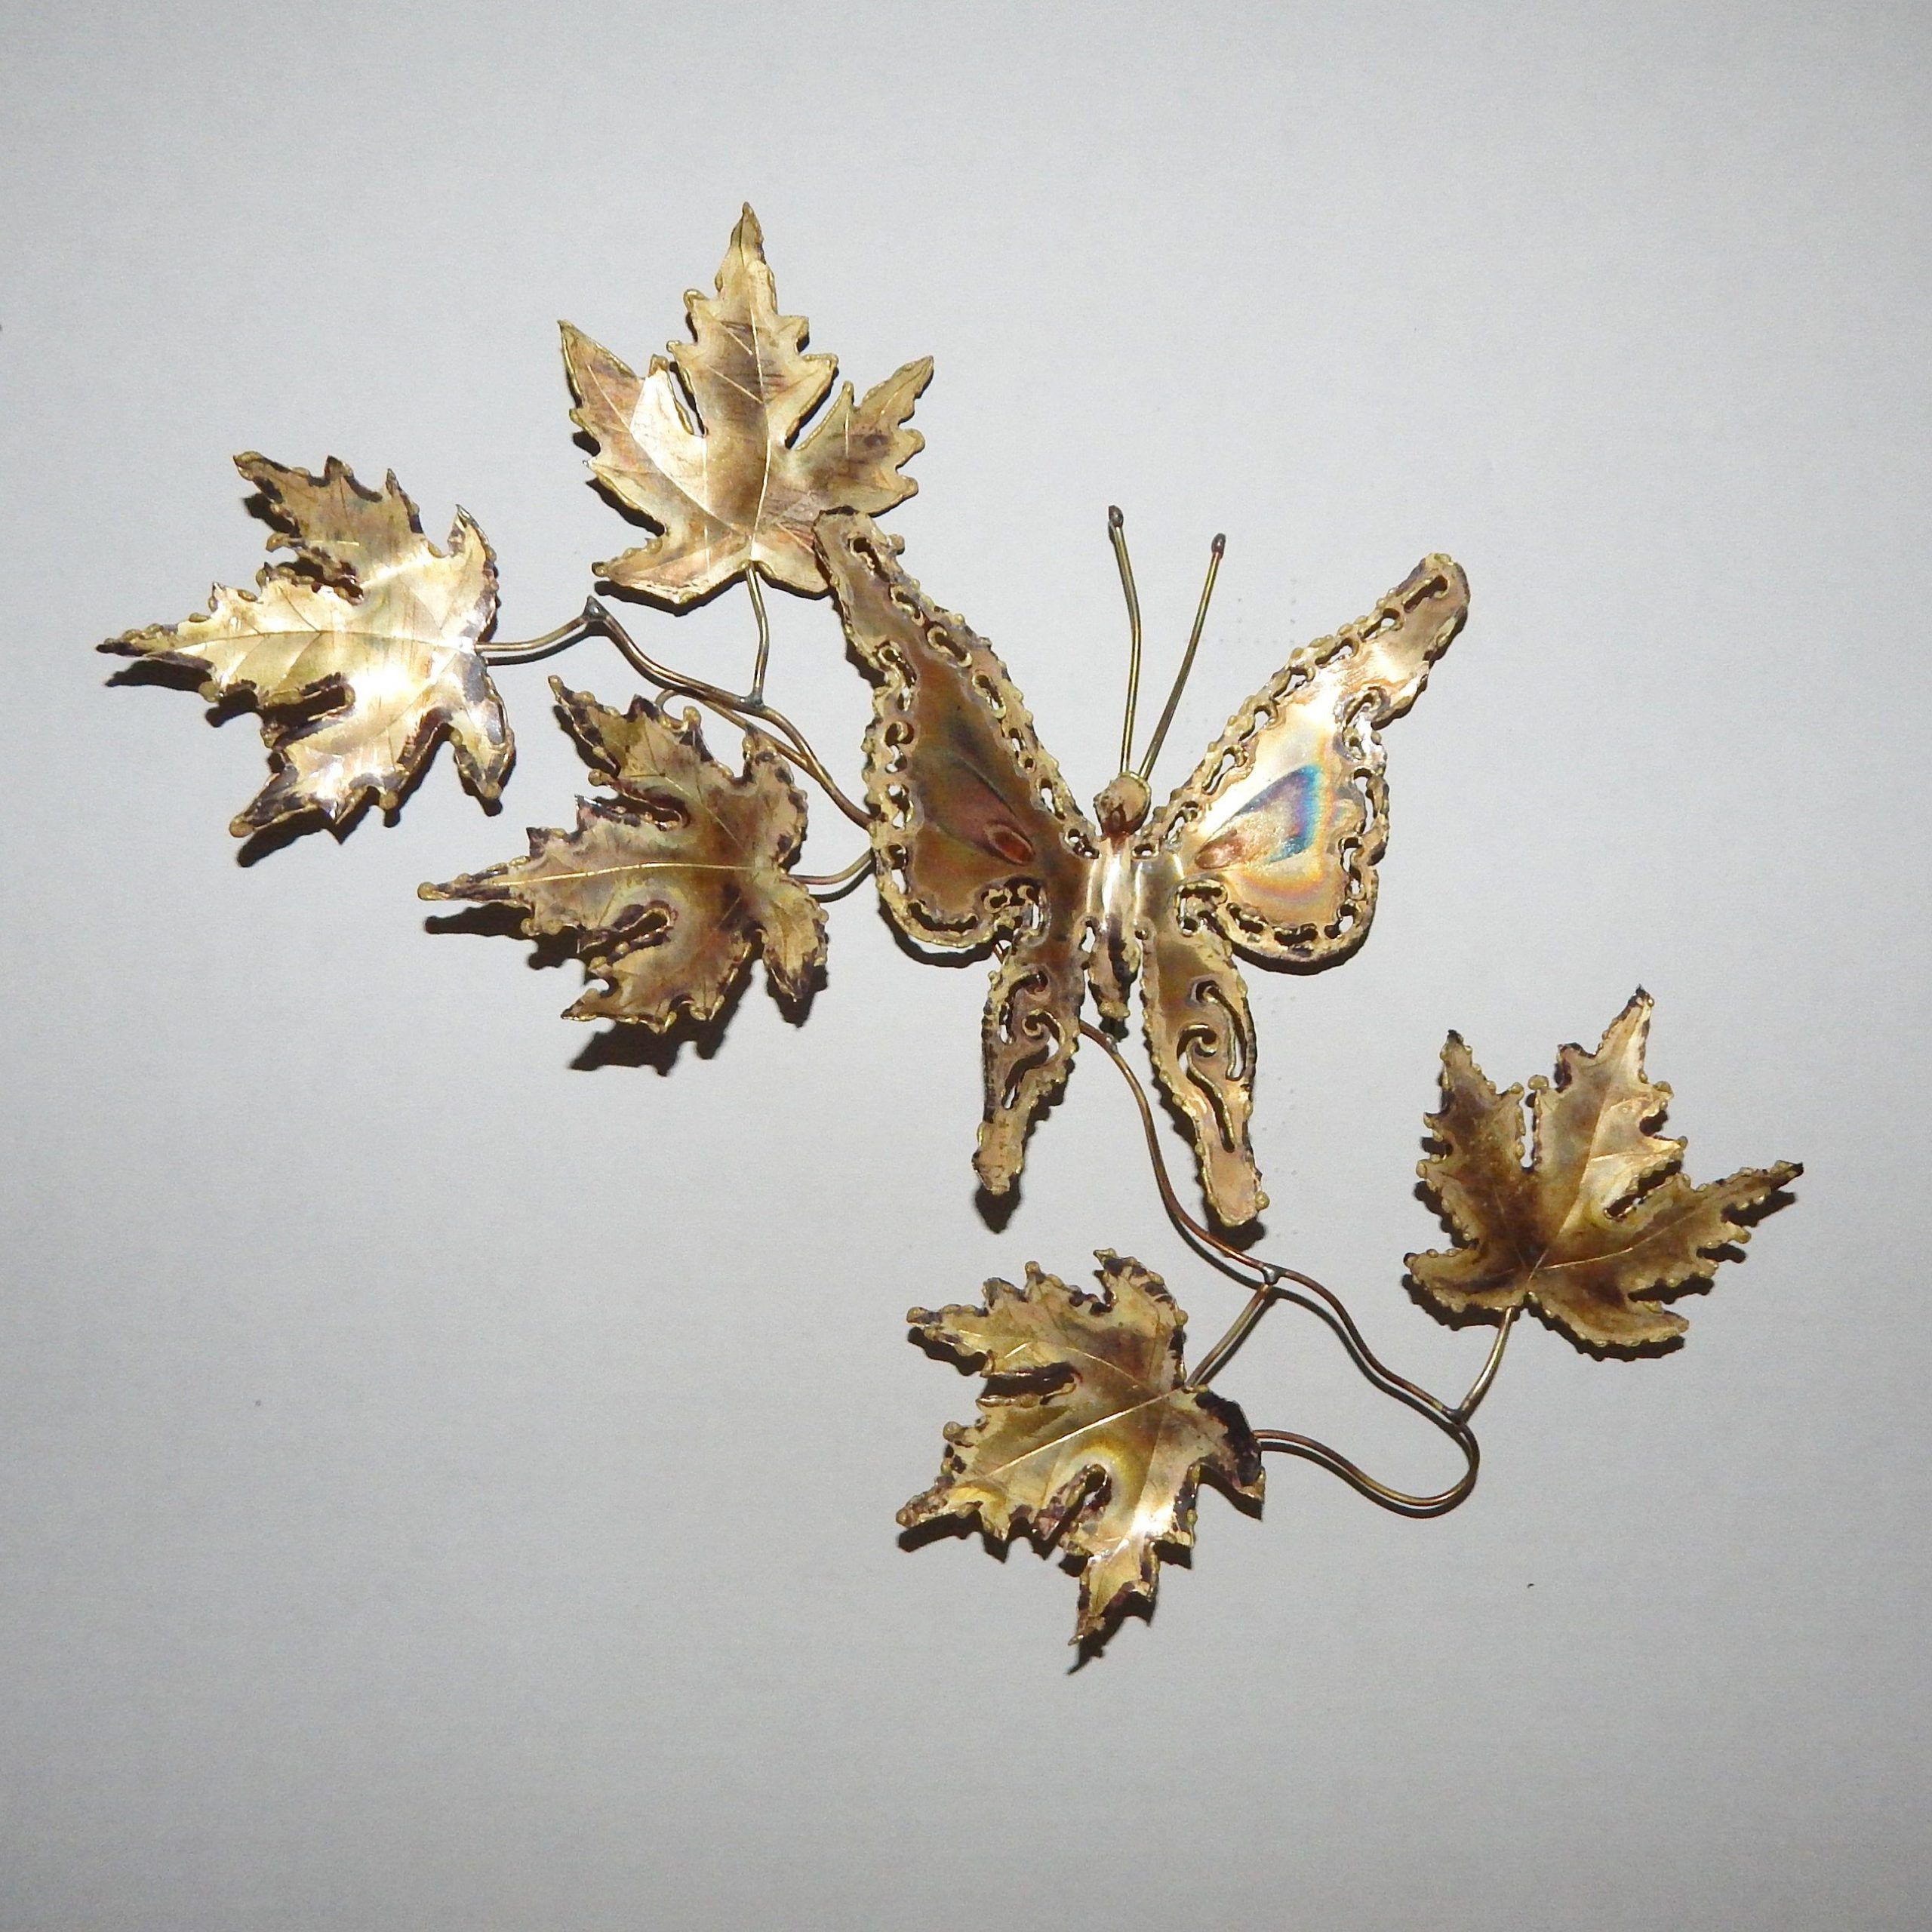 Metal Wall Decor Butterfly & Leaves Gold Tone Vintage Home | Etsy Within Best And Newest Antique Silver Metal Wall Art Sculptures (View 7 of 20)